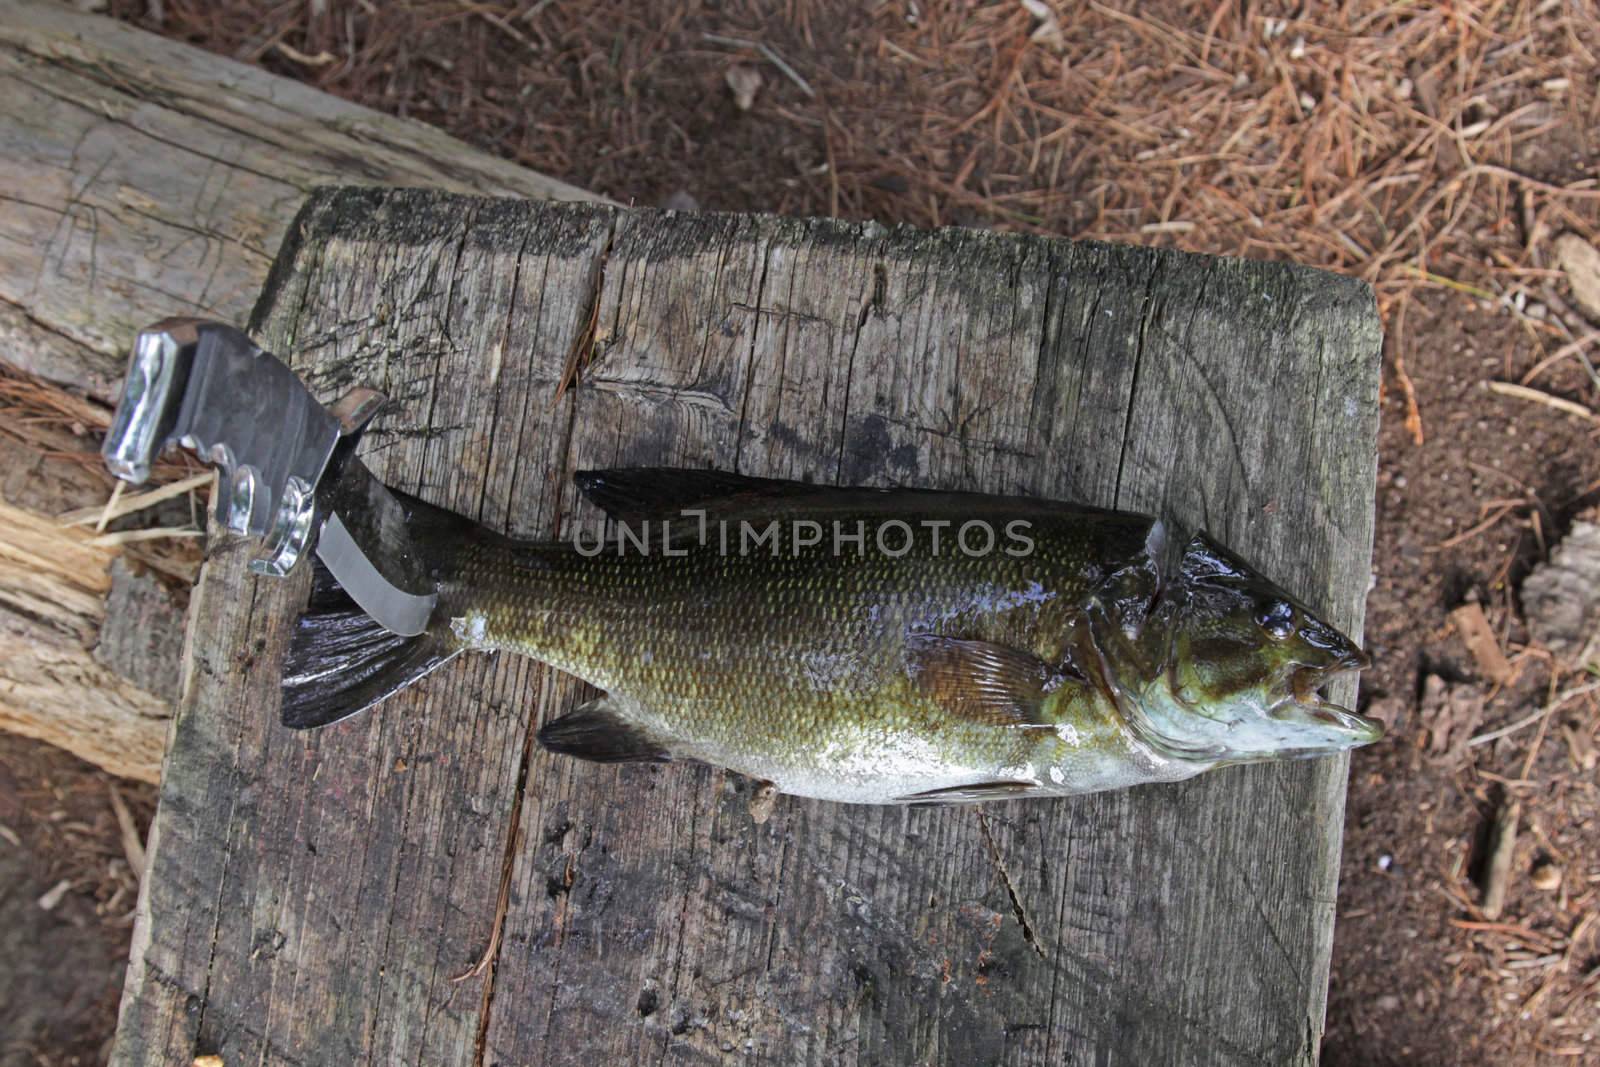 A freshly caught Largemouth Bass (Micropterus salmoides) ready to be cleaned.